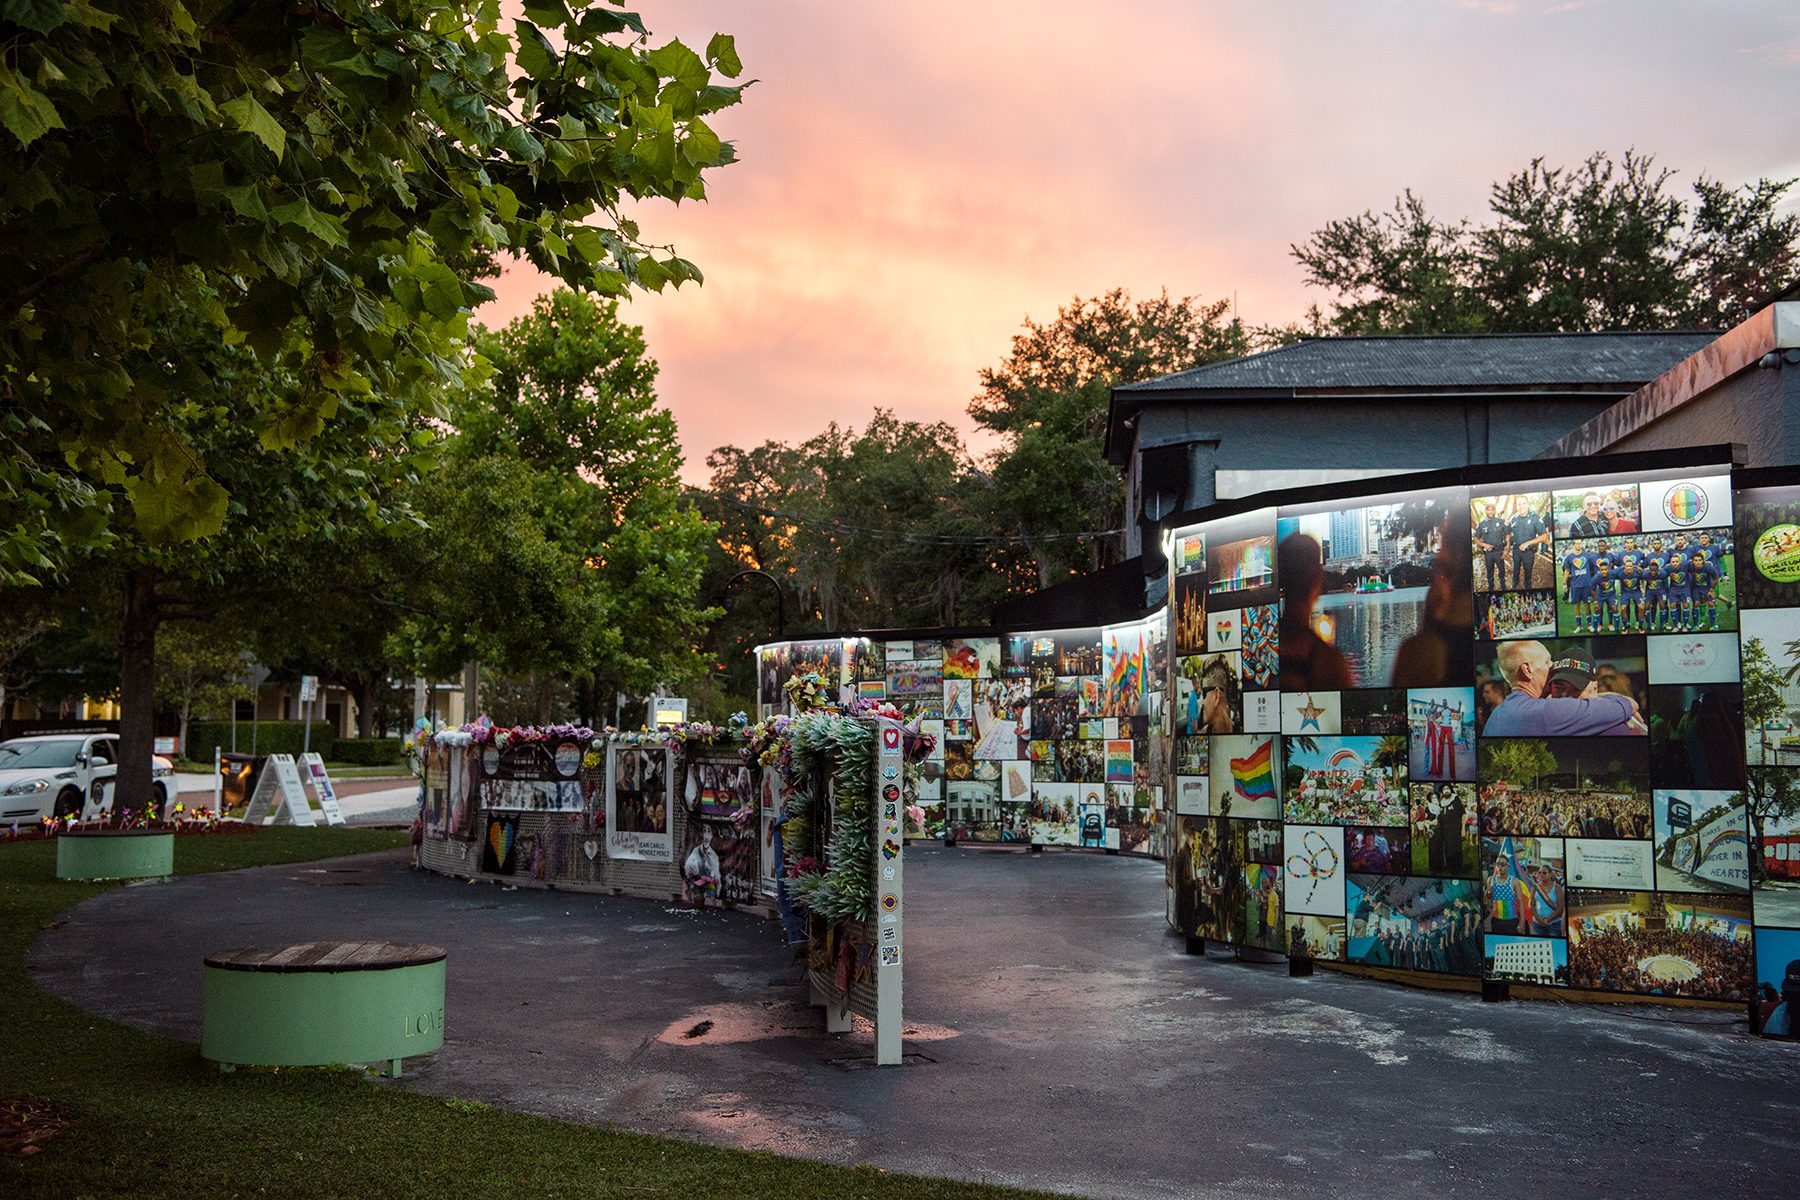 The Pulse Memorial at sunset